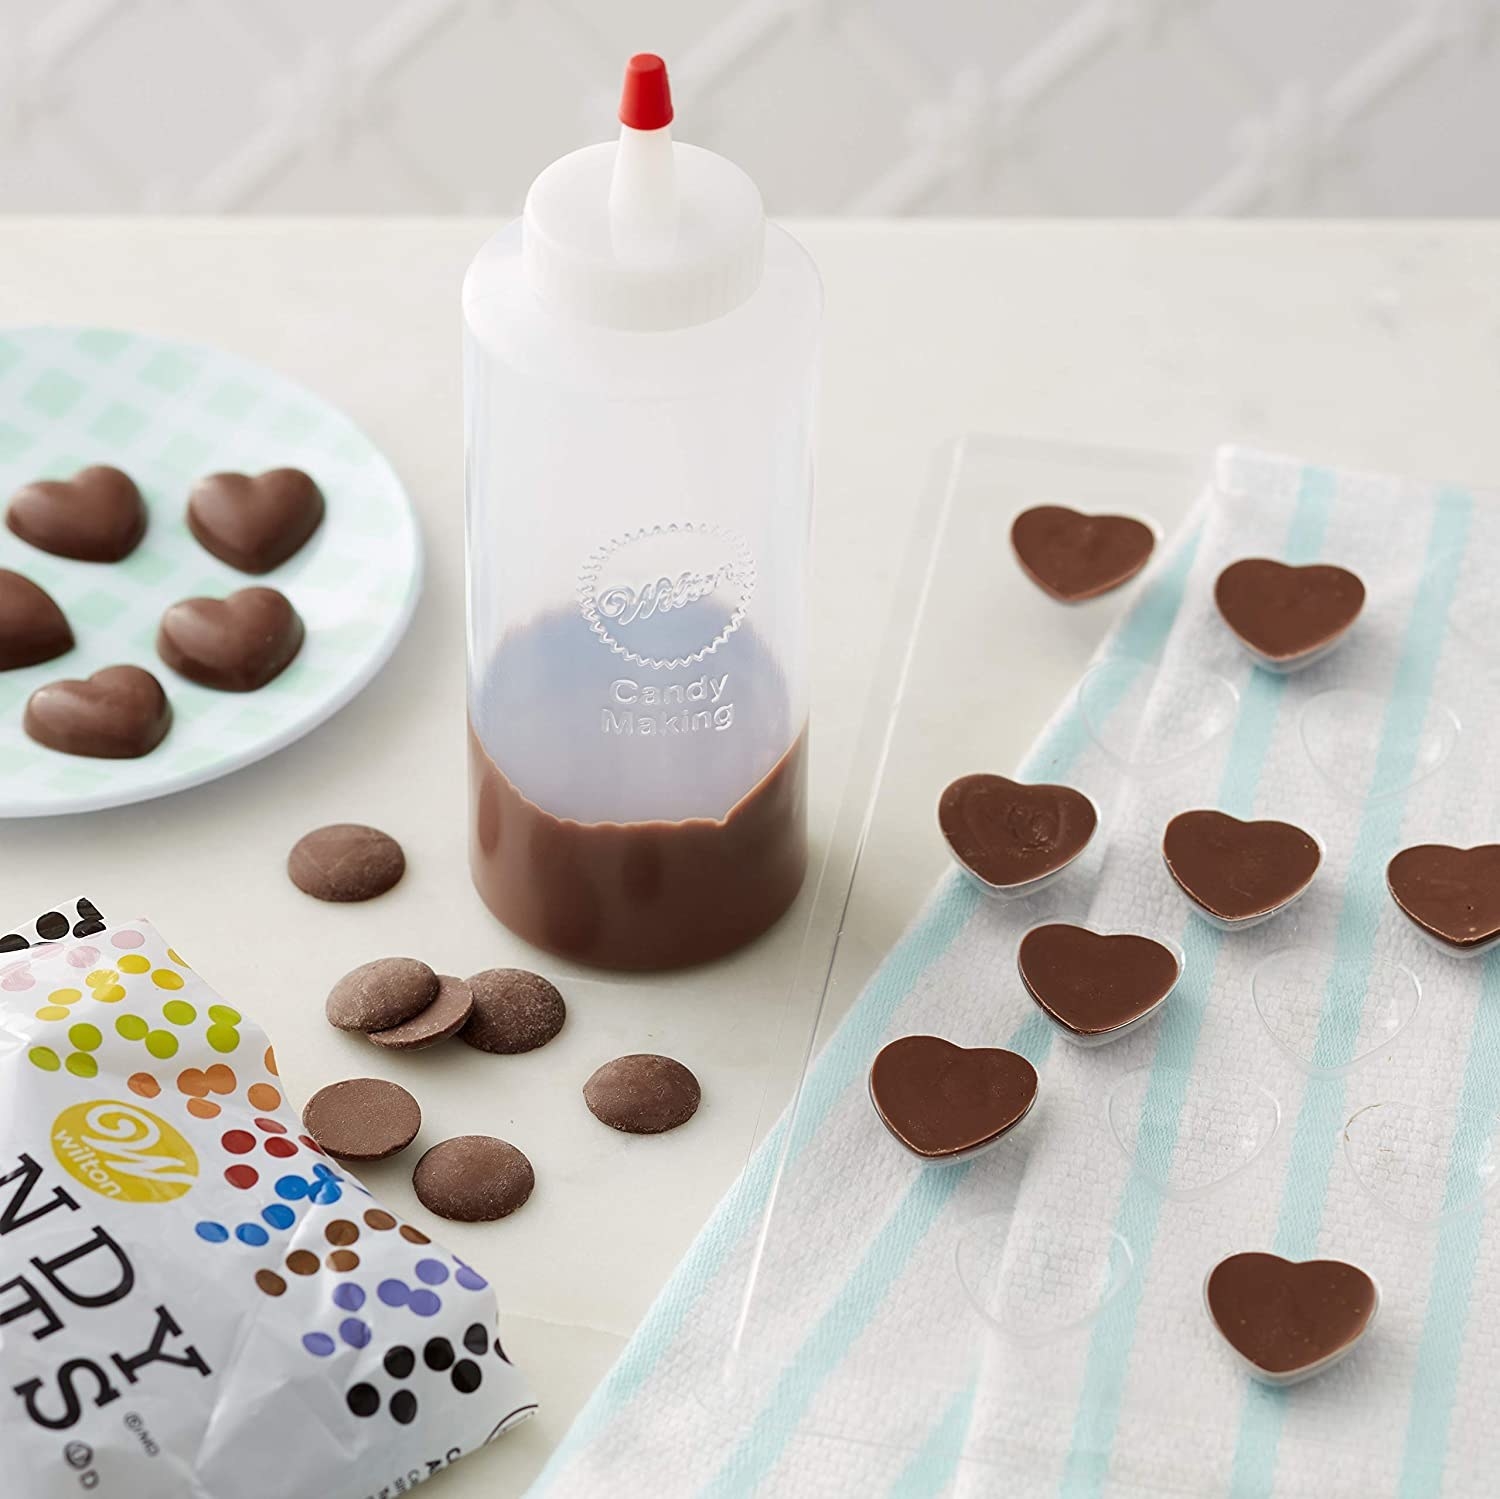 The squeeze bottle surrounded by chocolates